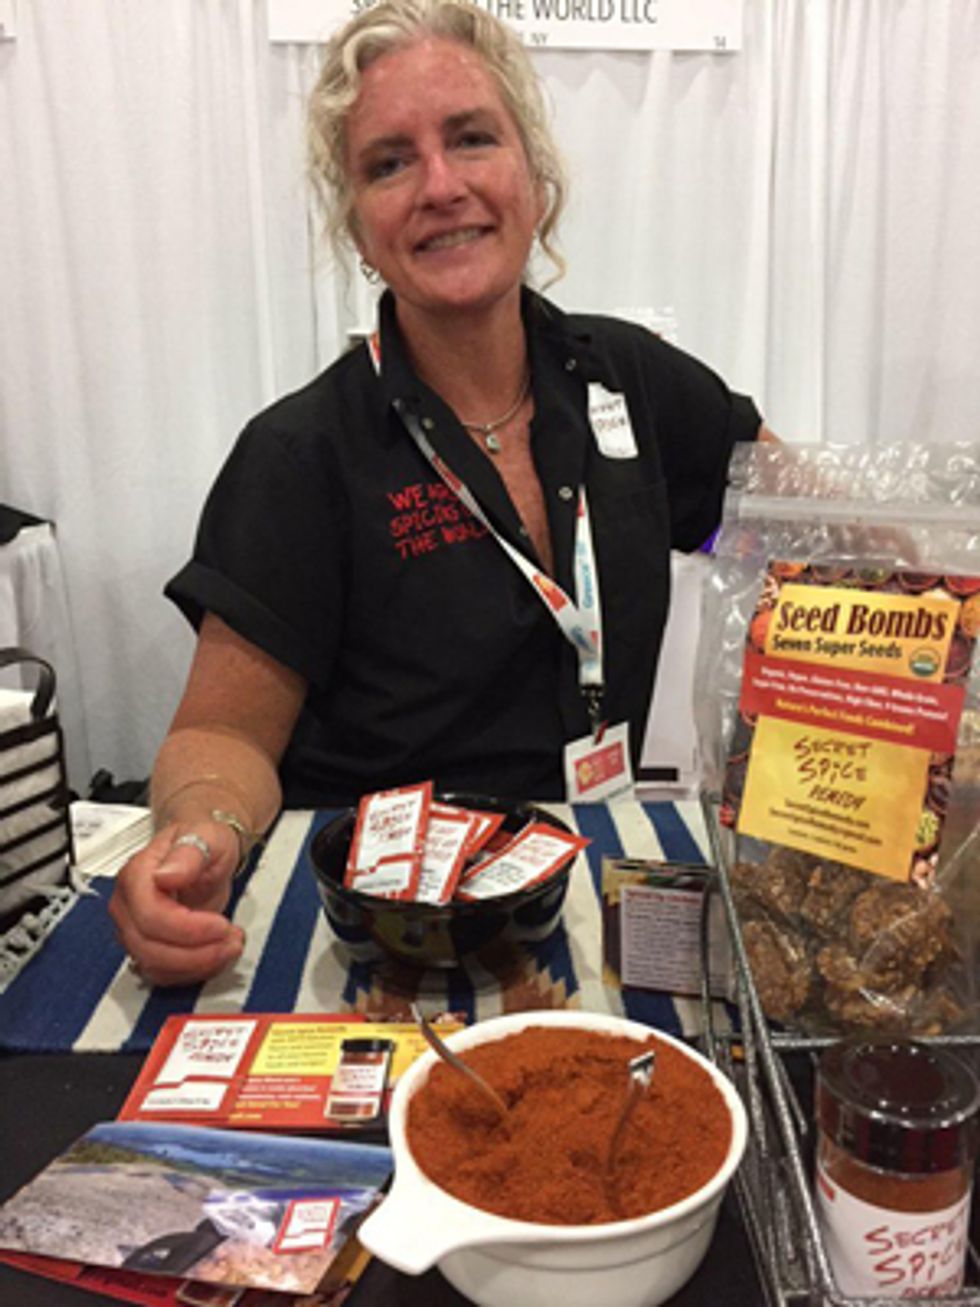 Janice Anne Wheeler from Secret Spice Remedy is a post-50 woman who created her own superfood spice blend.